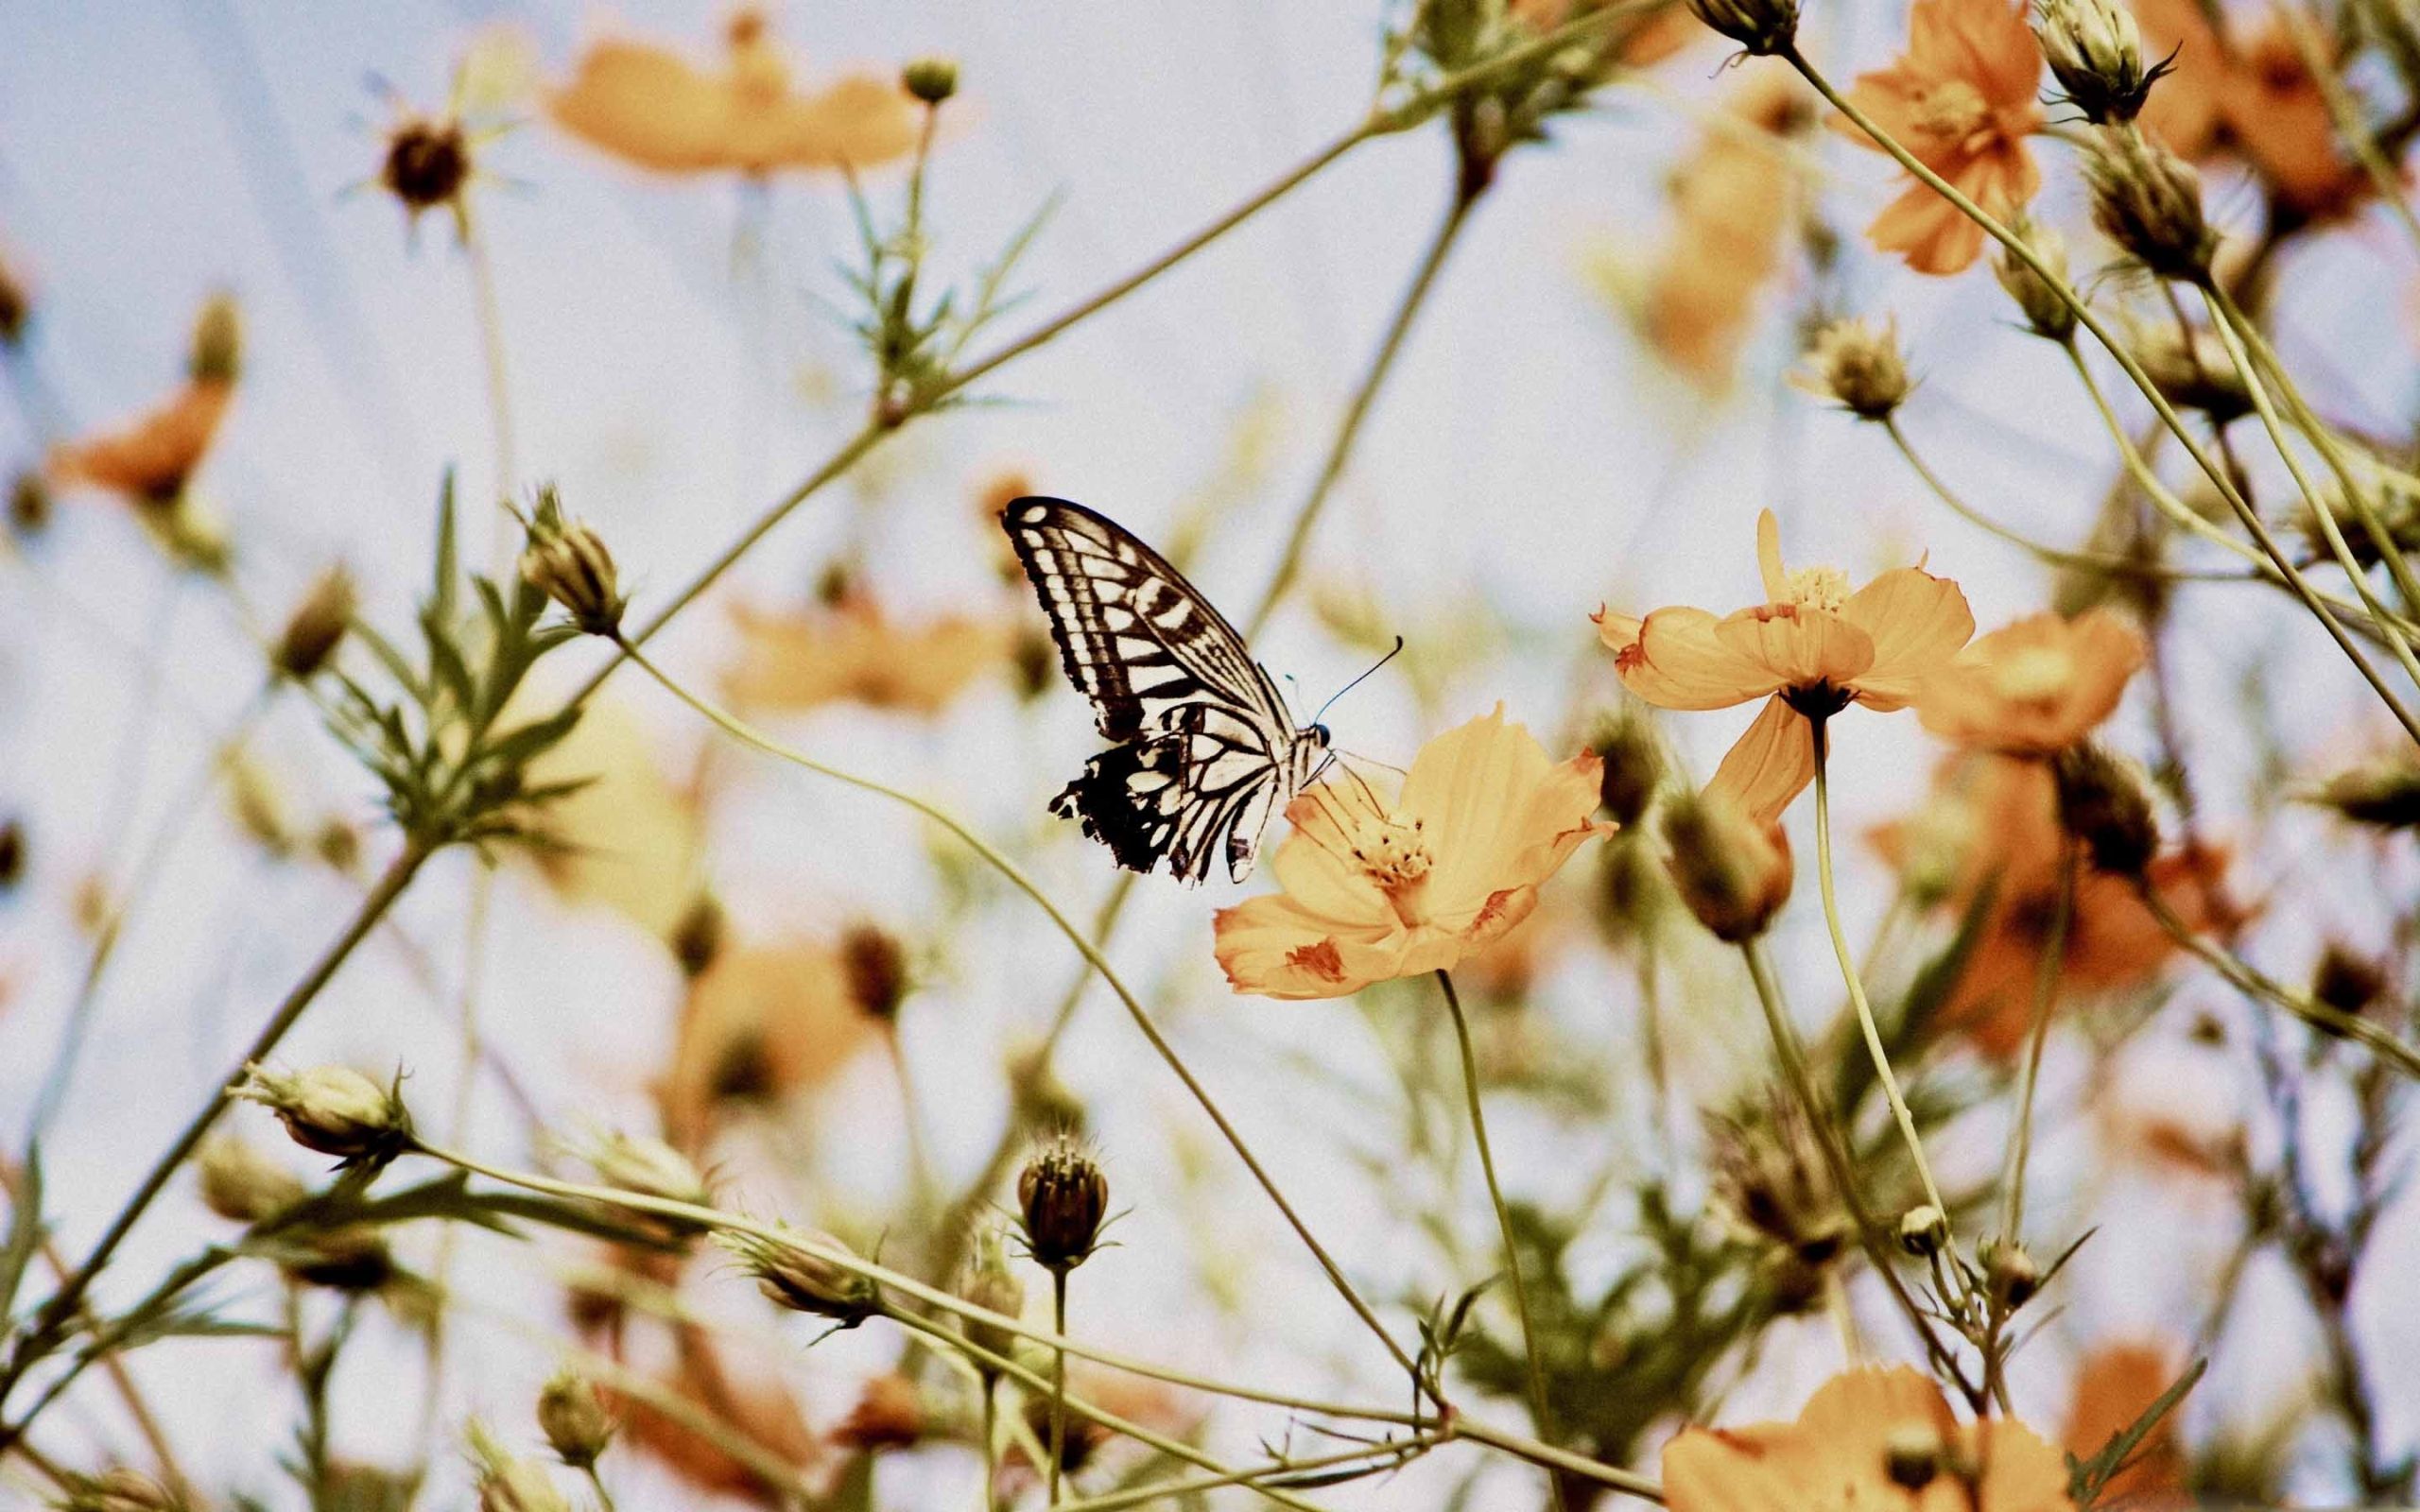 15 Selected butterfly aesthetic wallpaper desktop You Can Use It For ...